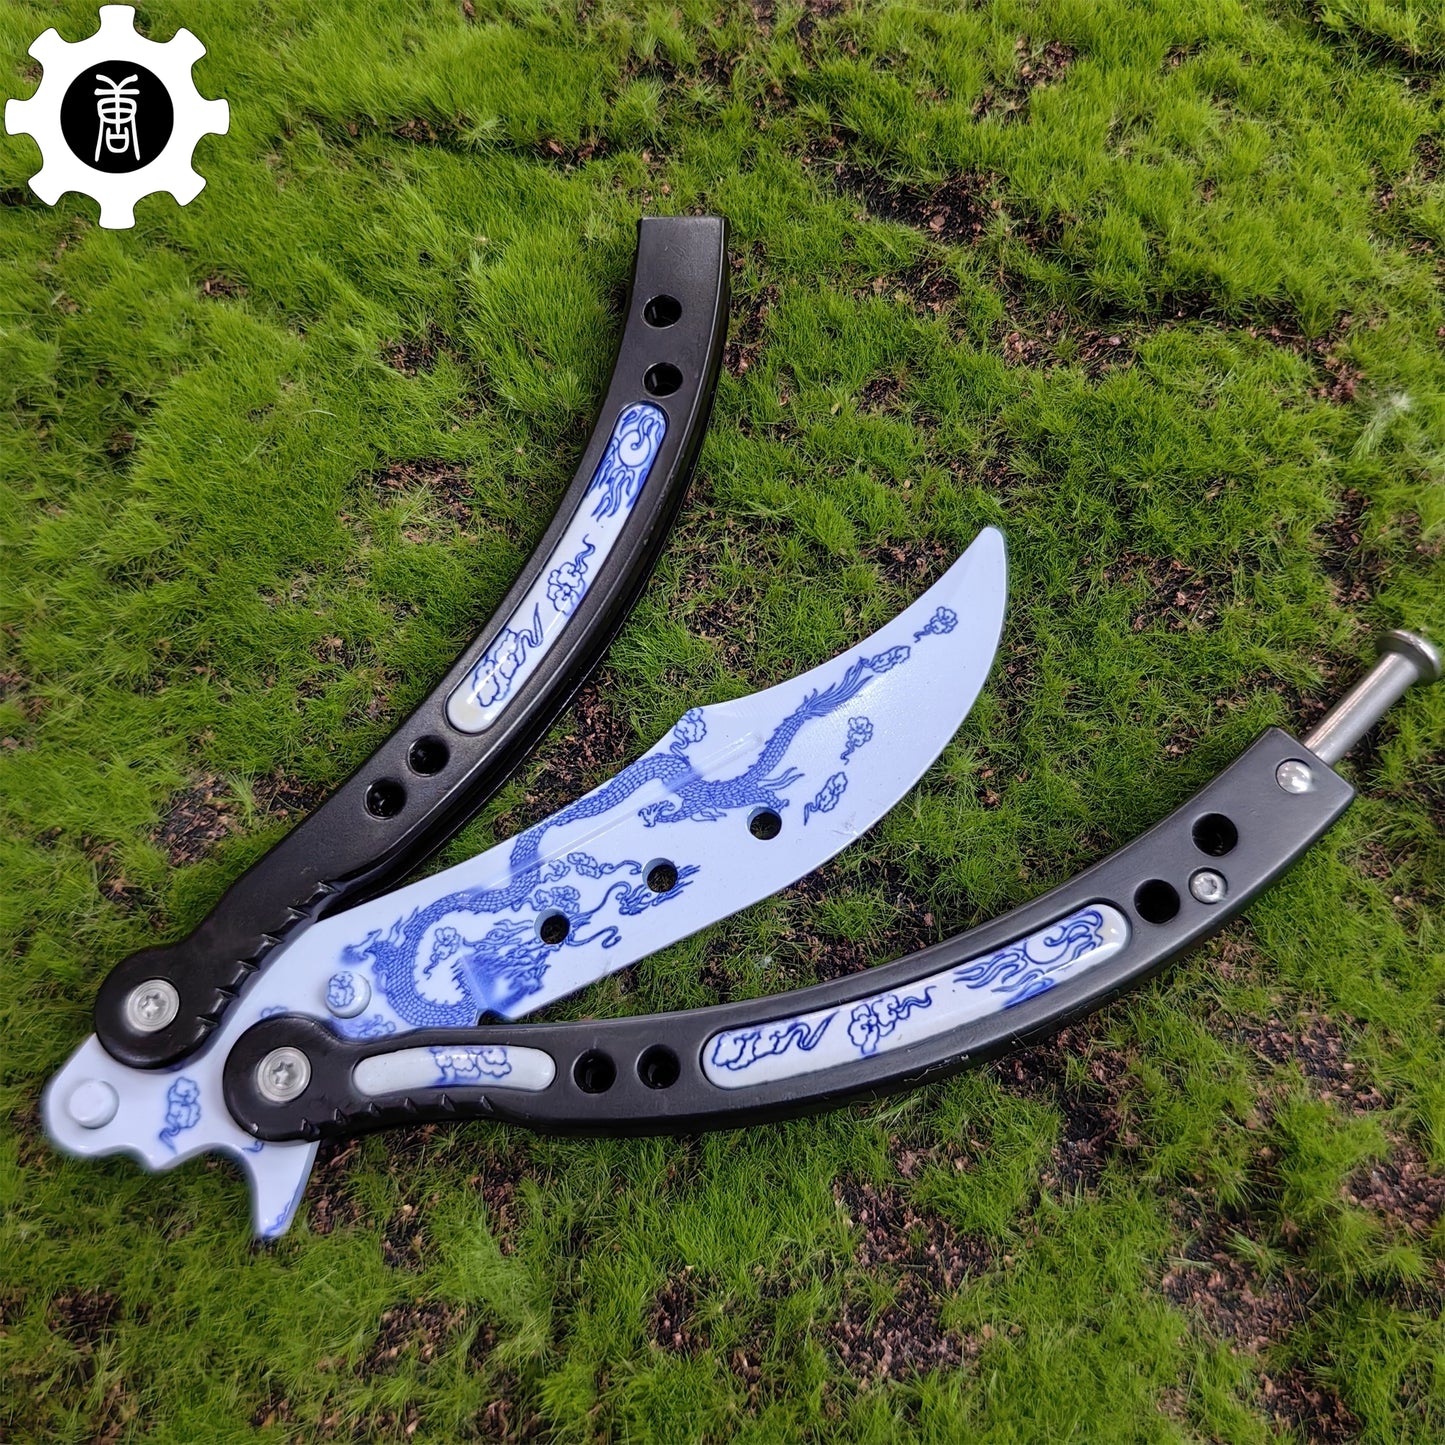 Game Butterfly Knife Azure Dragon Balisong Trainer